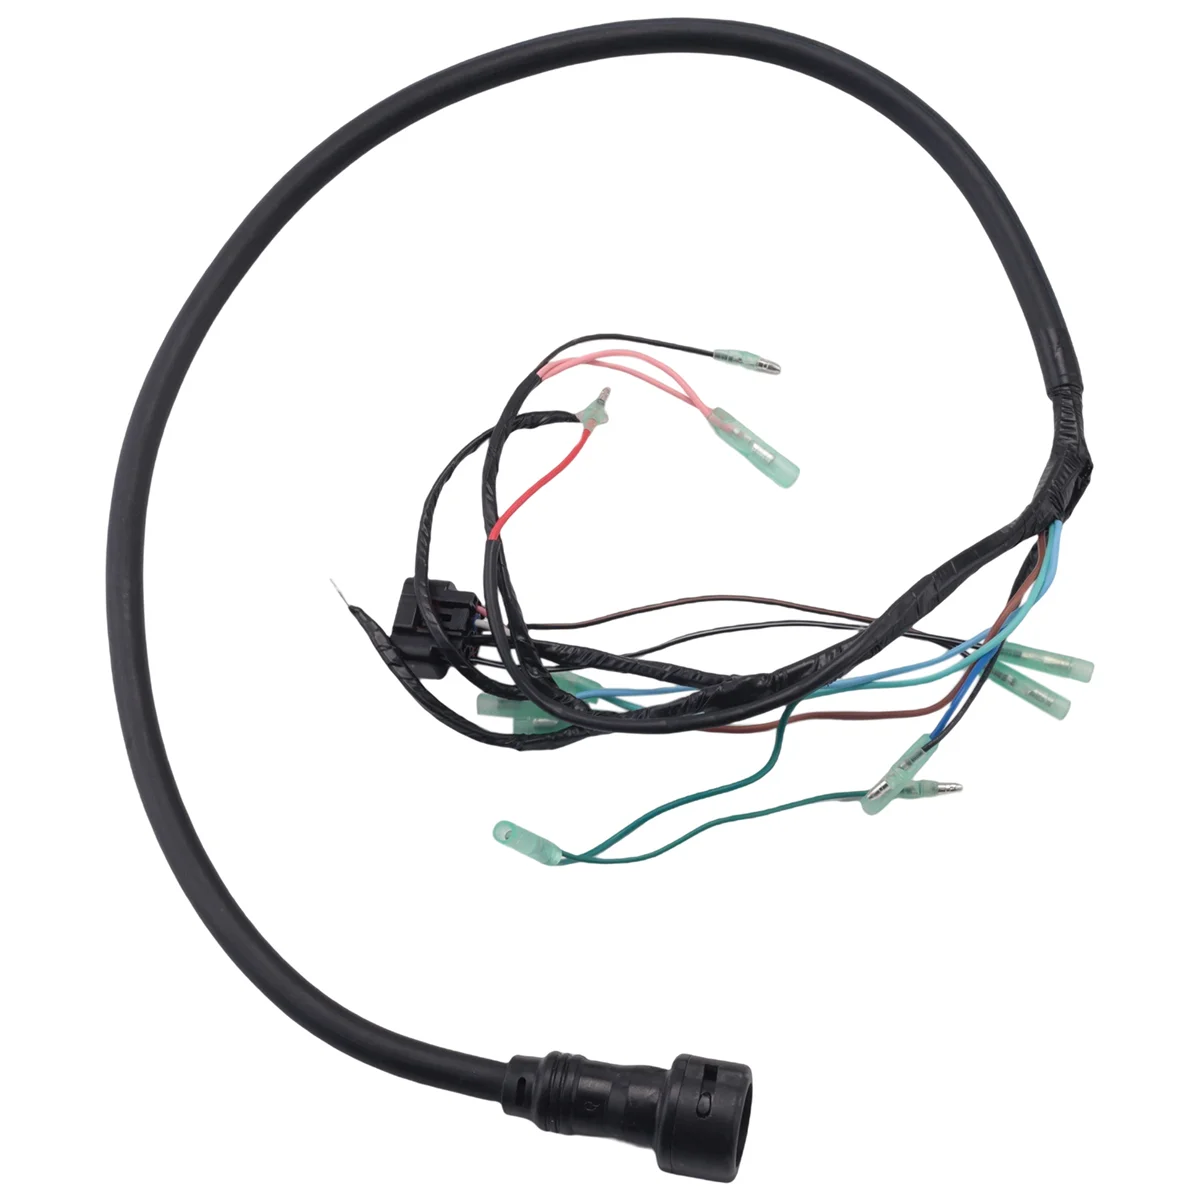 

Wire Harness Assy for Yamaha Boat Engine 2T 40HP 66T-82590-00-00 66T-82590-20 66T-82590-20-00 66T-82590-00